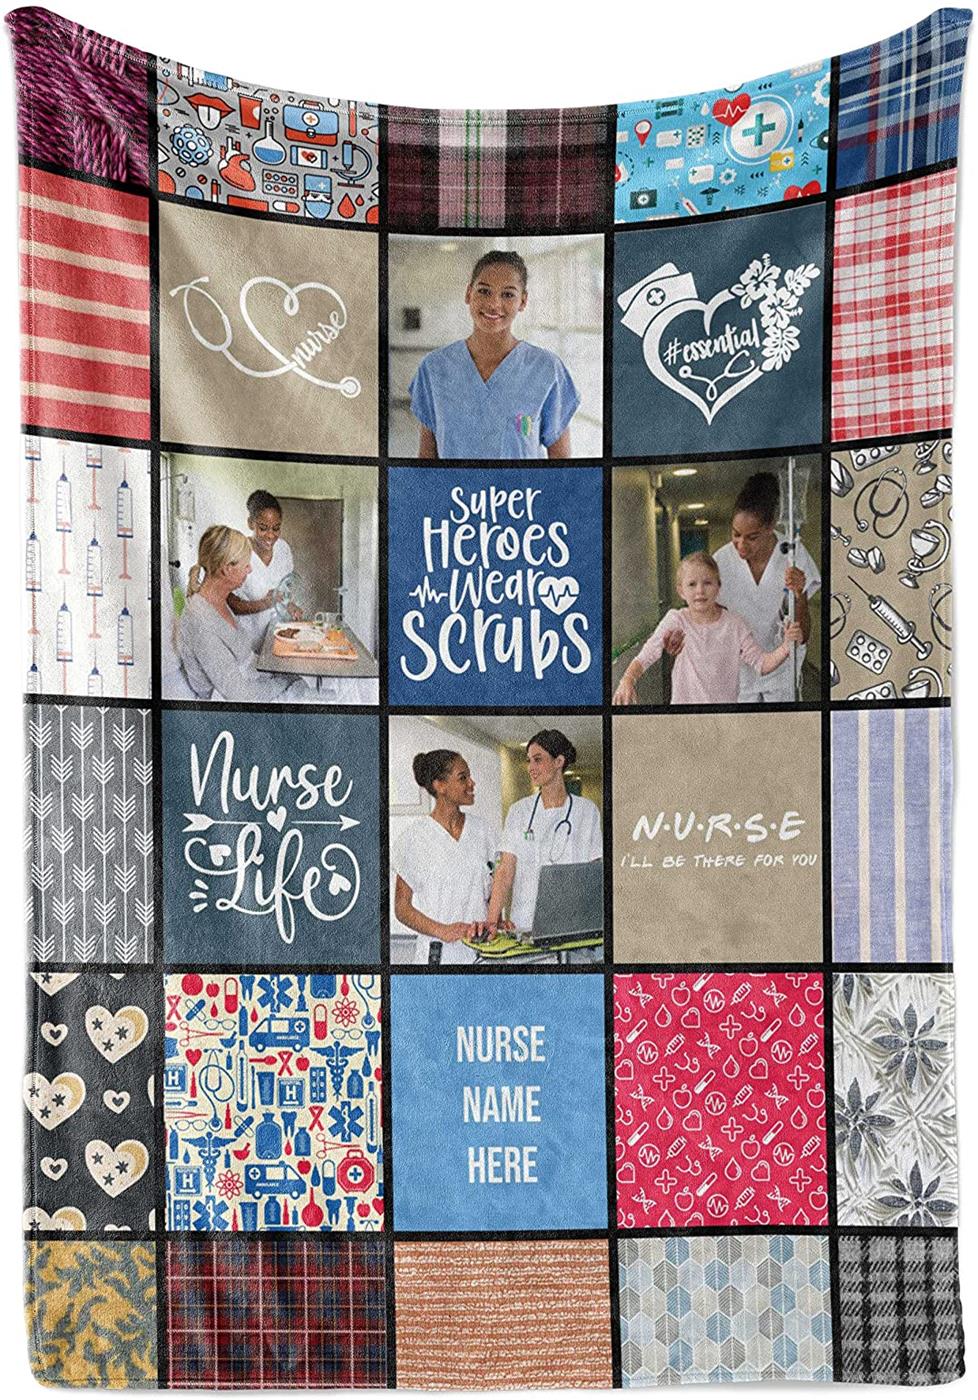 Registered Nurse Gifts for Women, Personalized Throw Blanket Photo Collage Graduation Present, RN Christmas or Birthday Gift Ideas